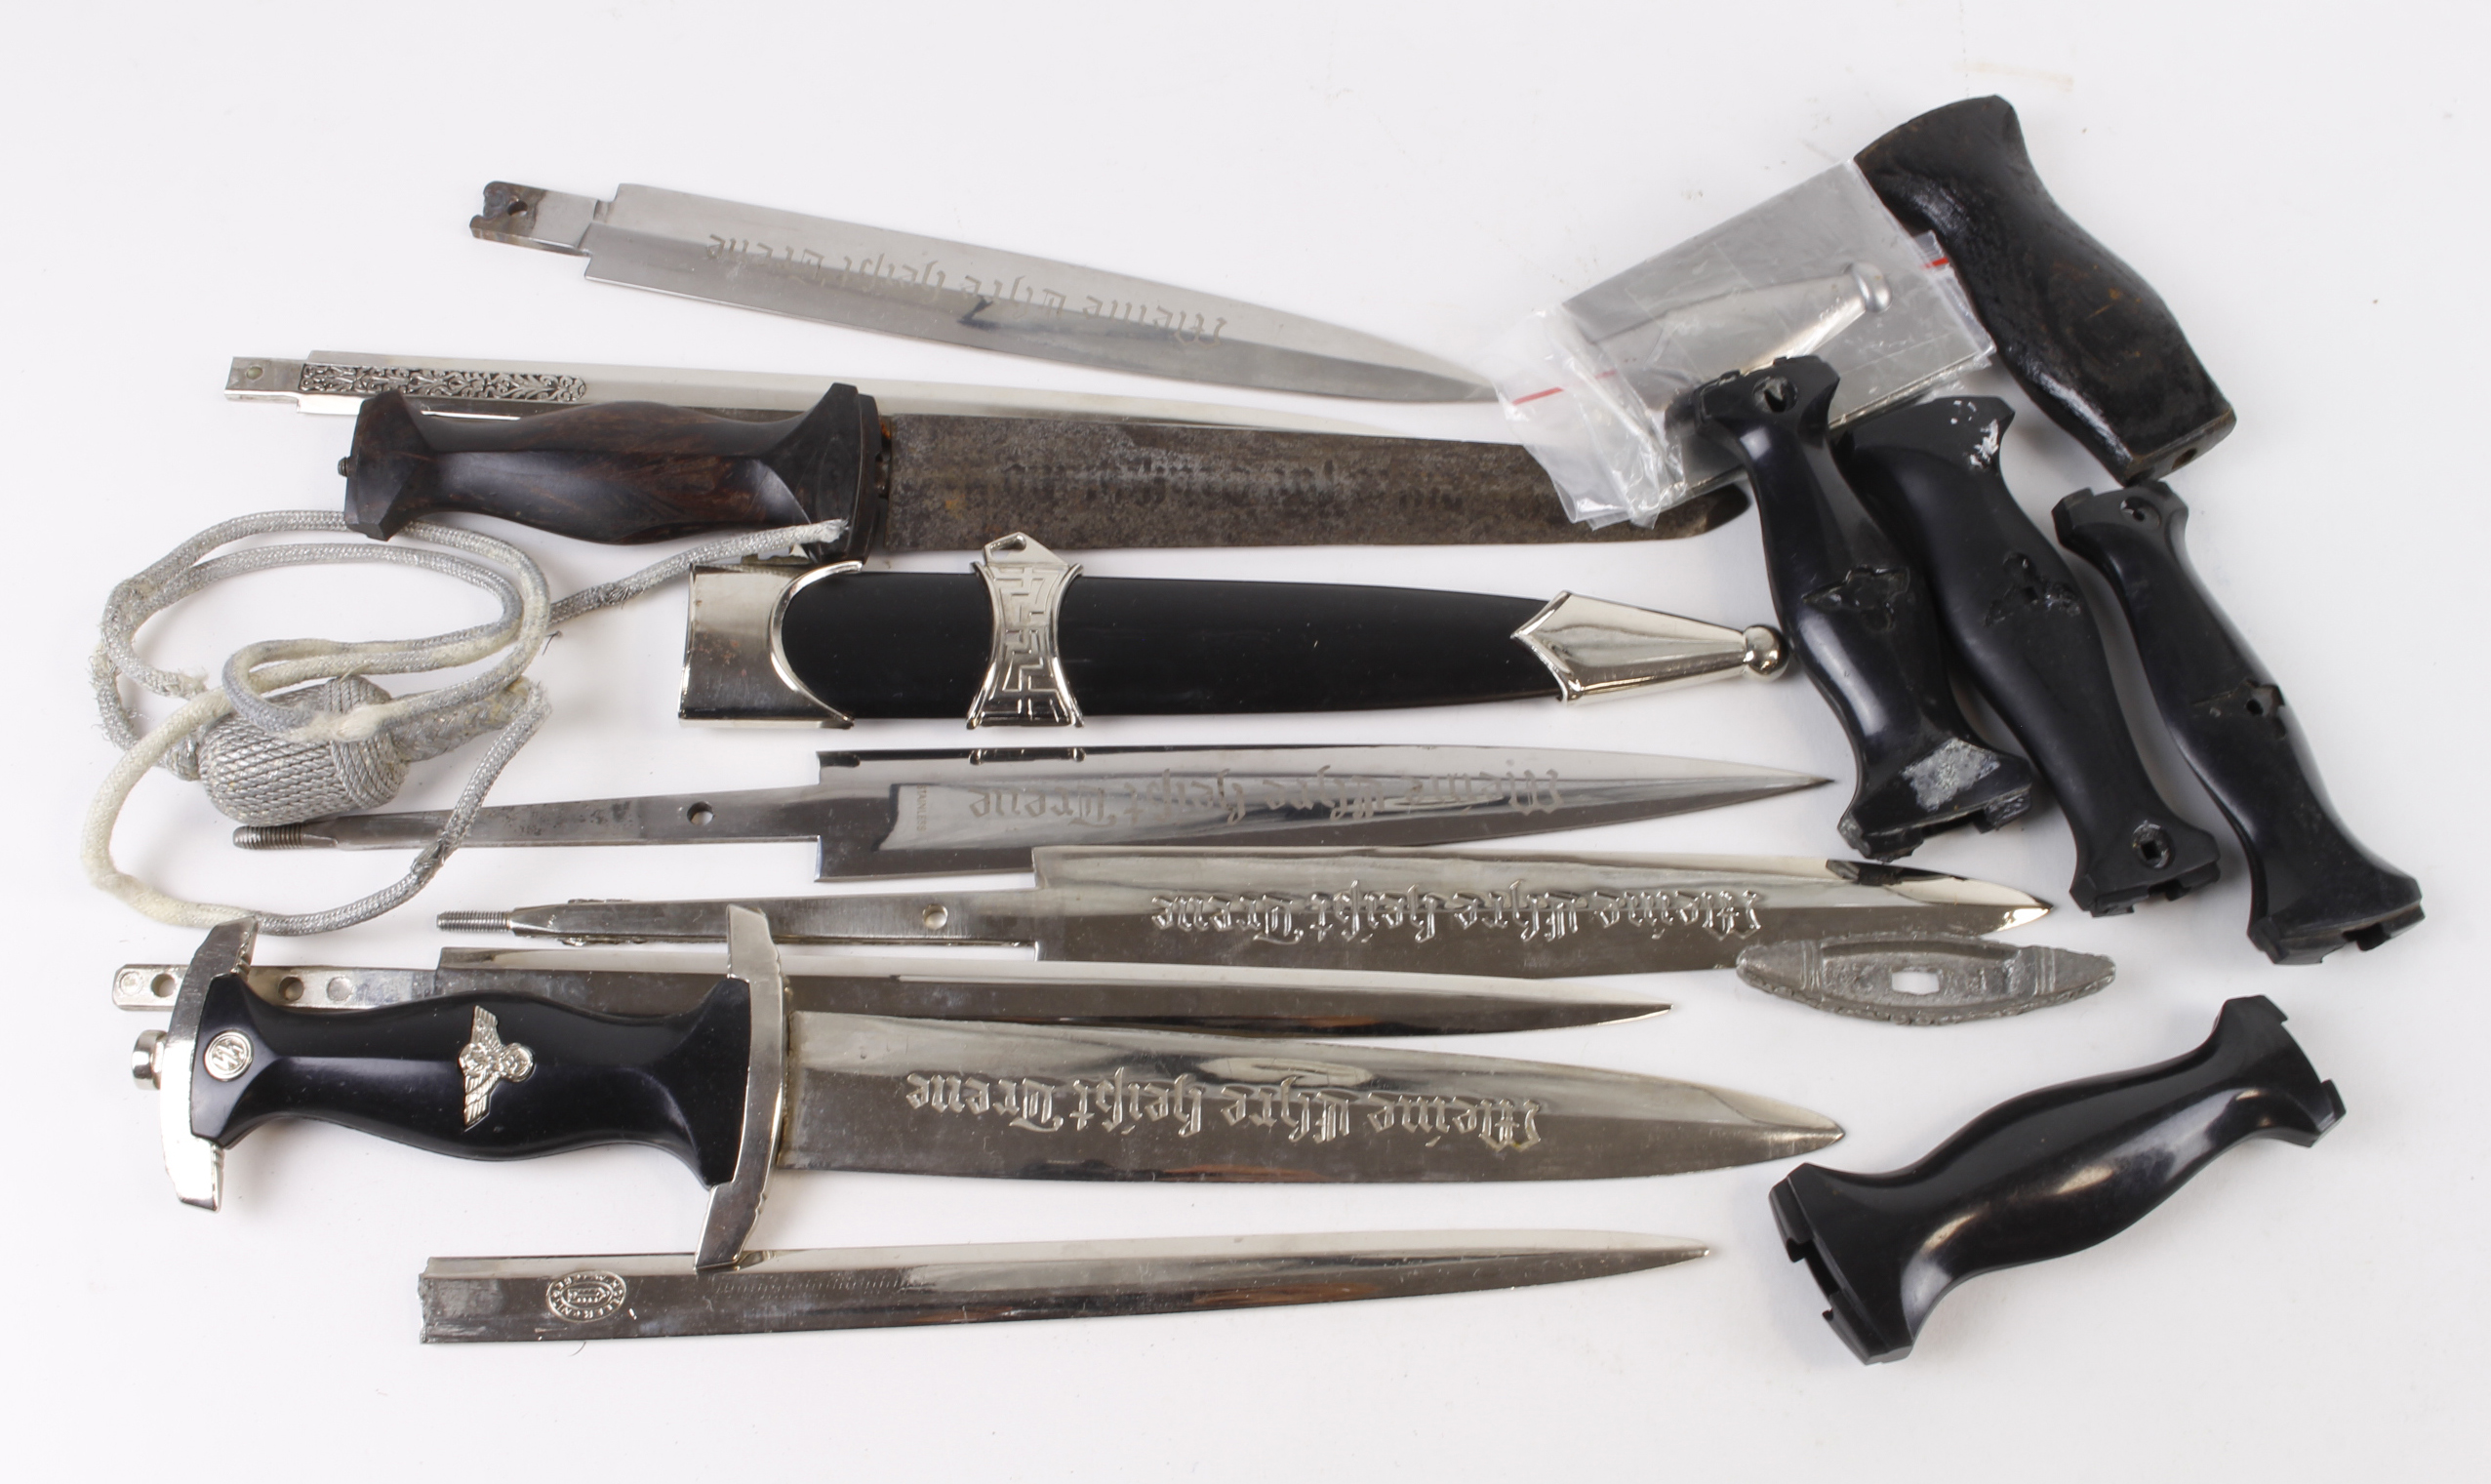 German dagger parts, mostly copy, some useful parts, condition varies.